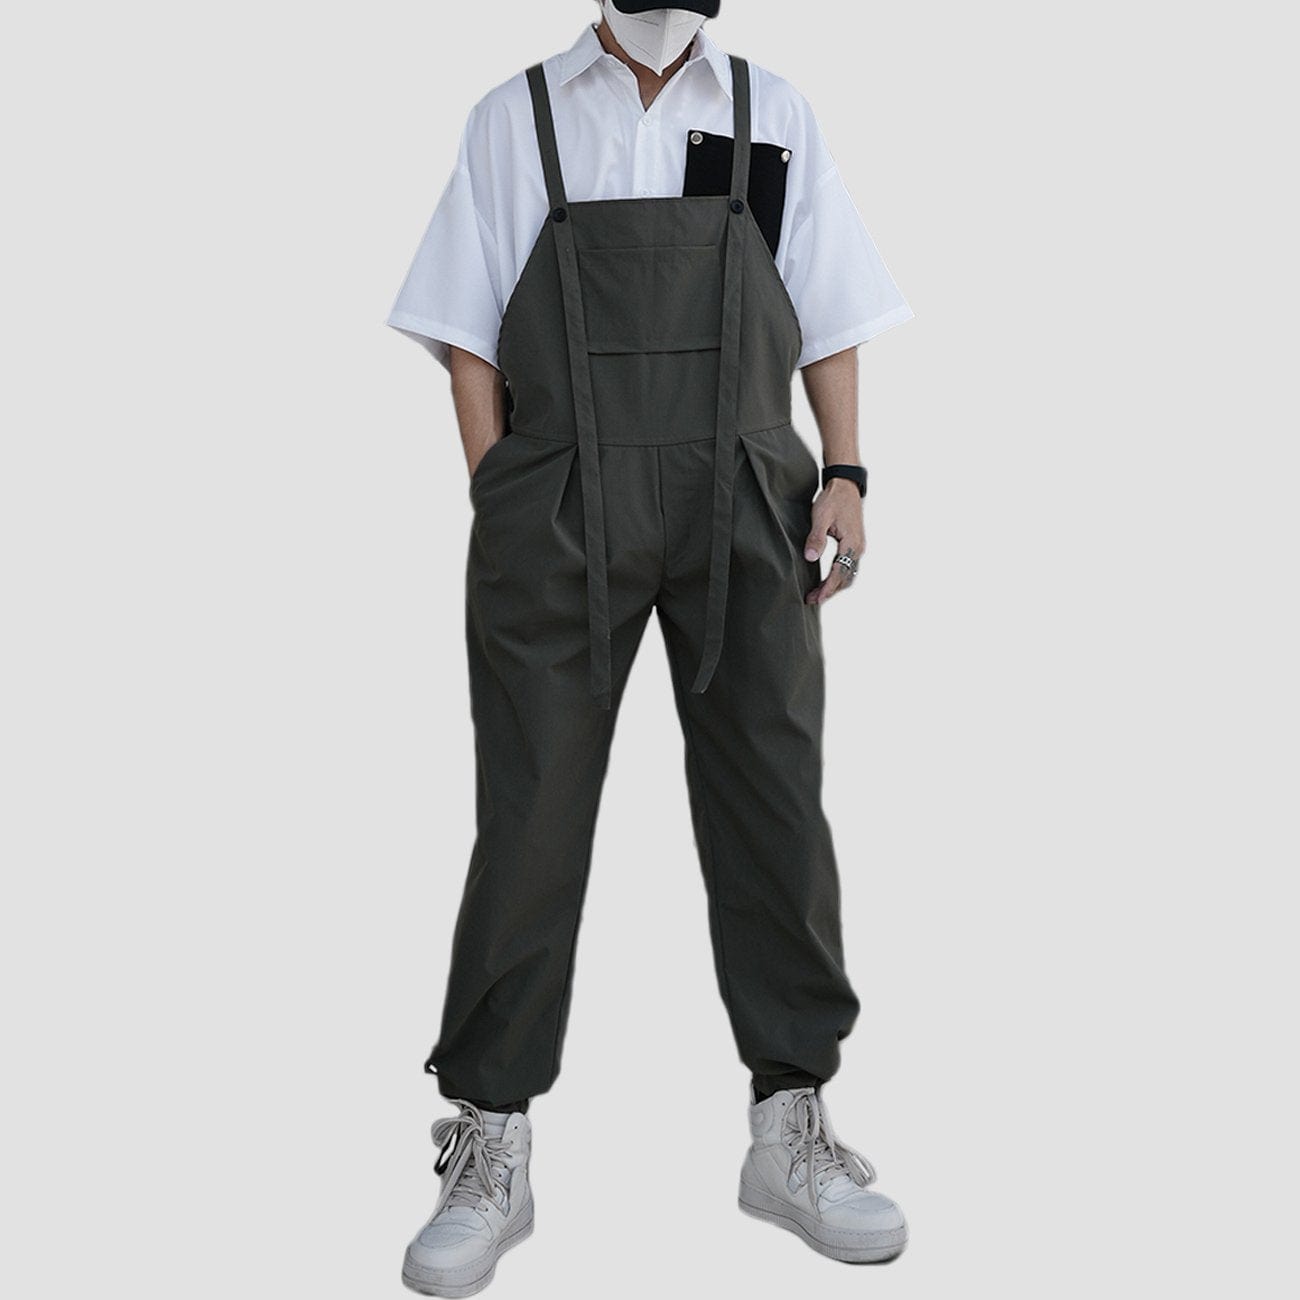 Bandage Ribbons Cotton Overalls Streetwear Brand Techwear Combat Tactical YUGEN THEORY